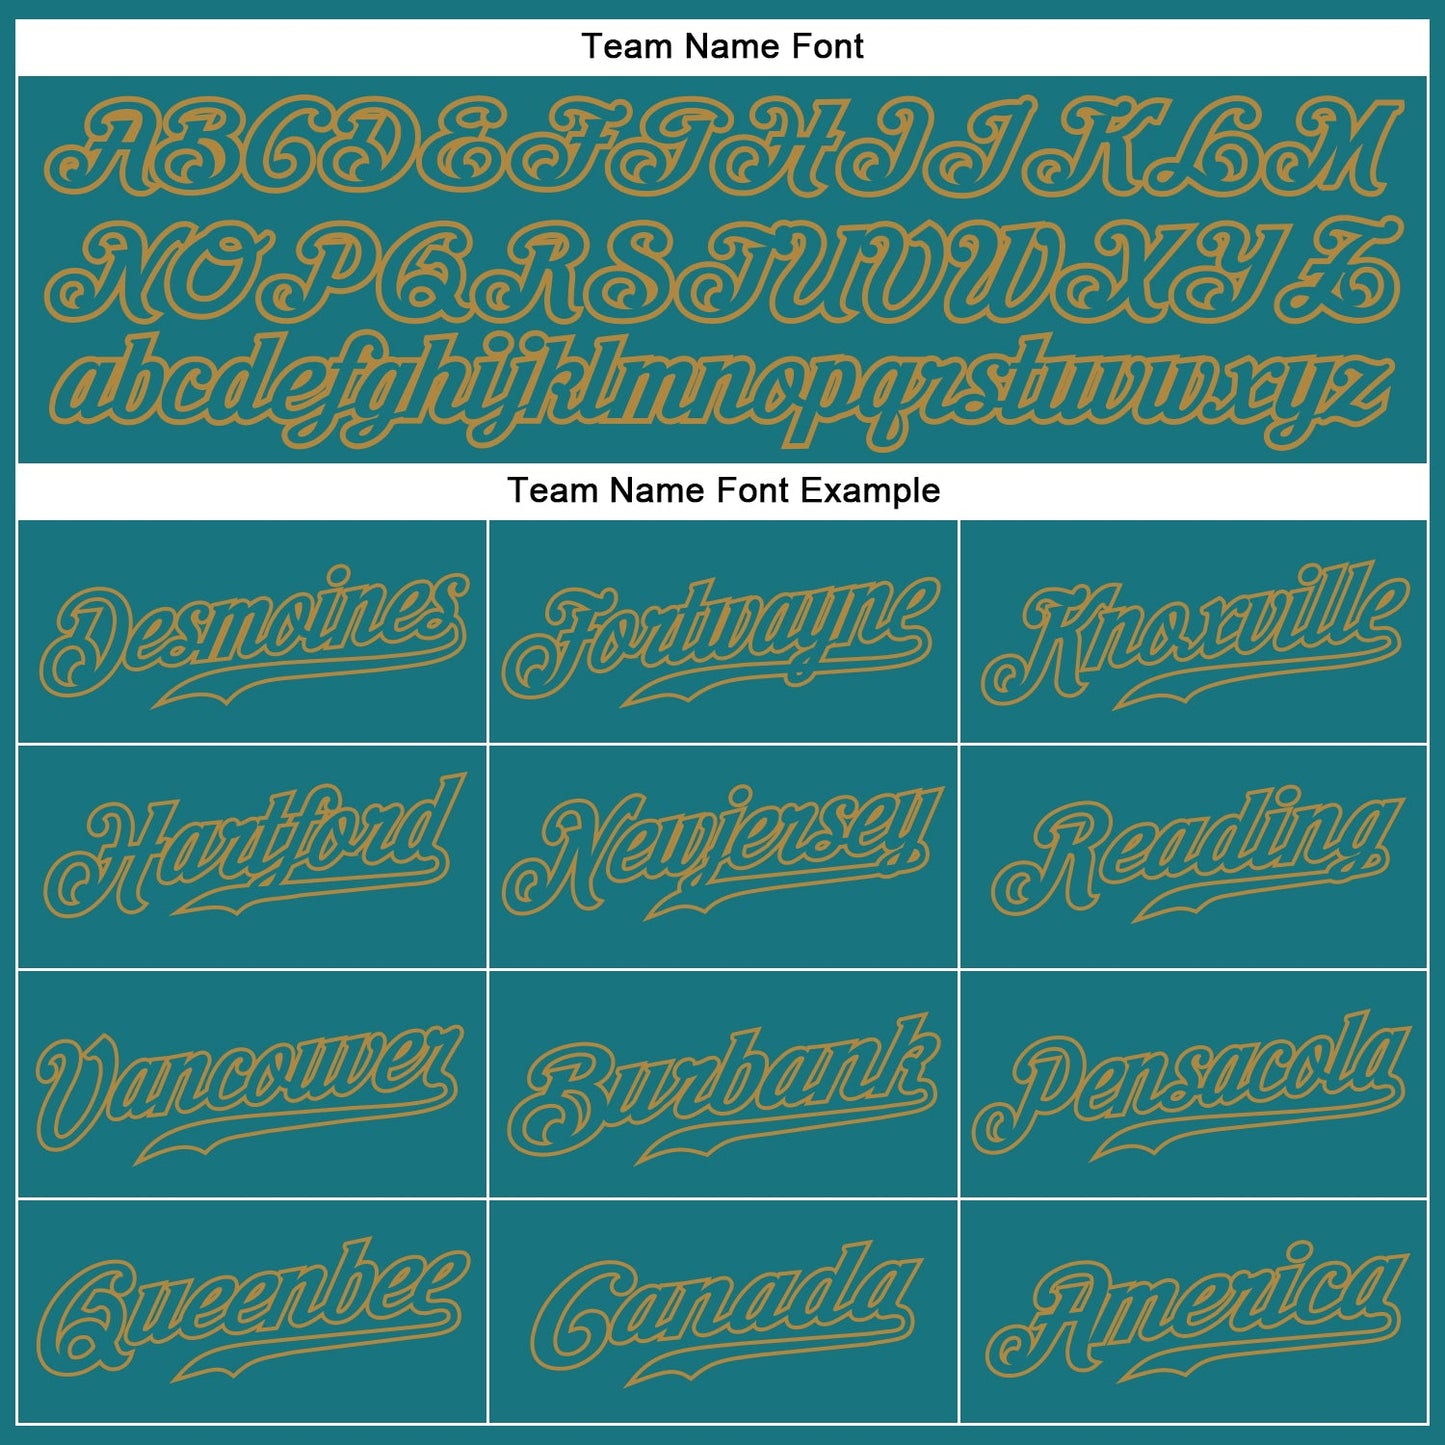 Custom Teal Teal-Old Gold Authentic Baseball Jersey